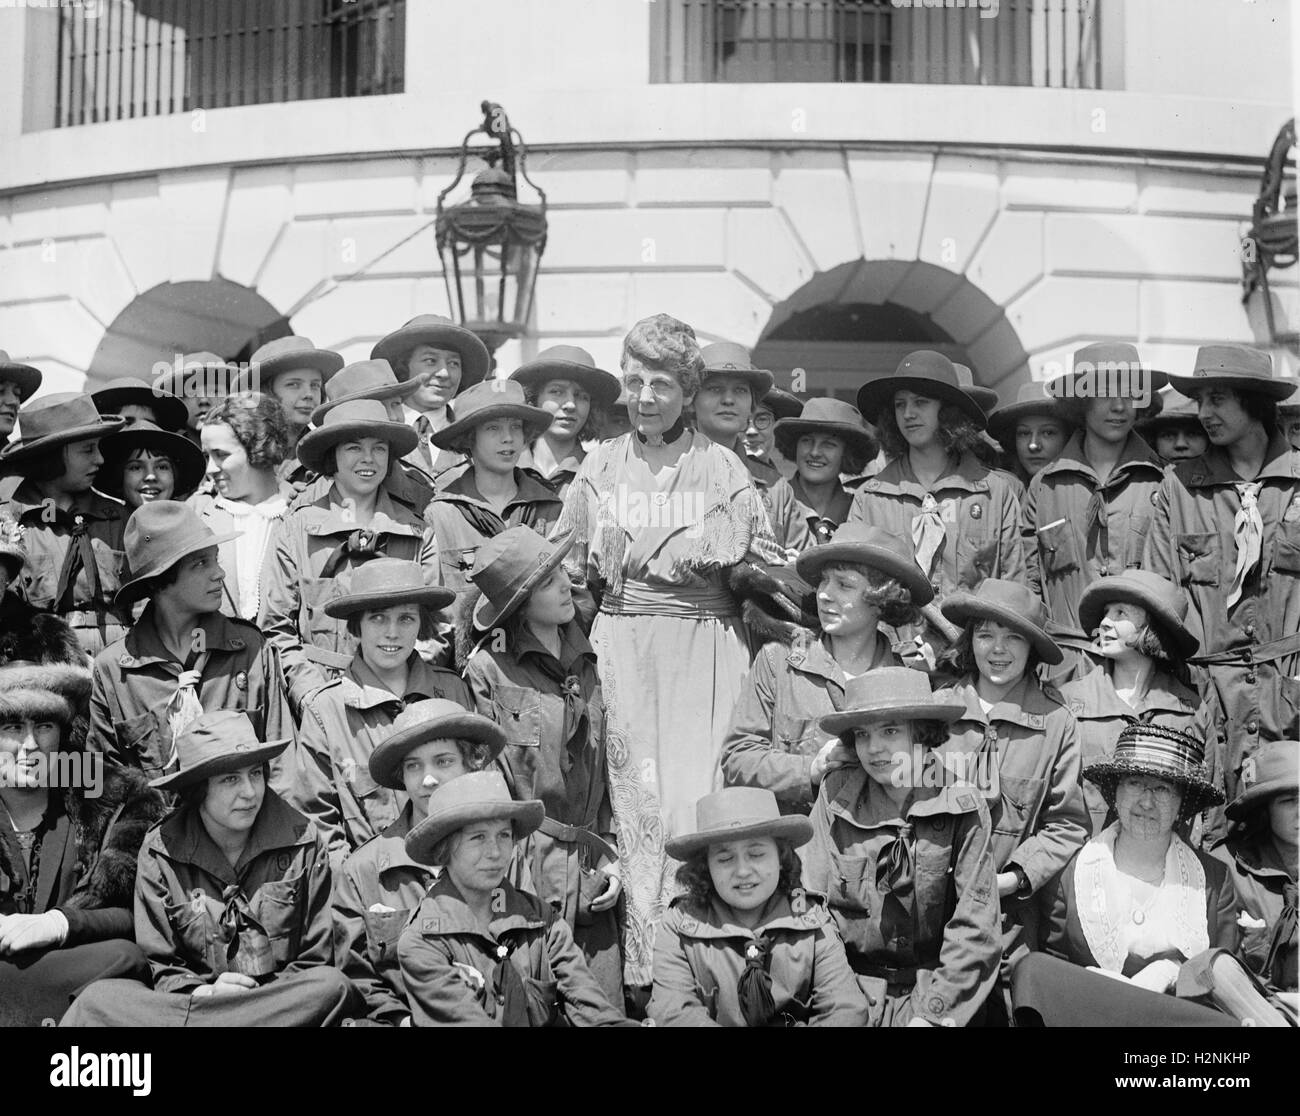 First Lady Florence Harding with Girl Scouts at White House, Washington DC, USA, National Photo Company, April 1922 Stock Photo